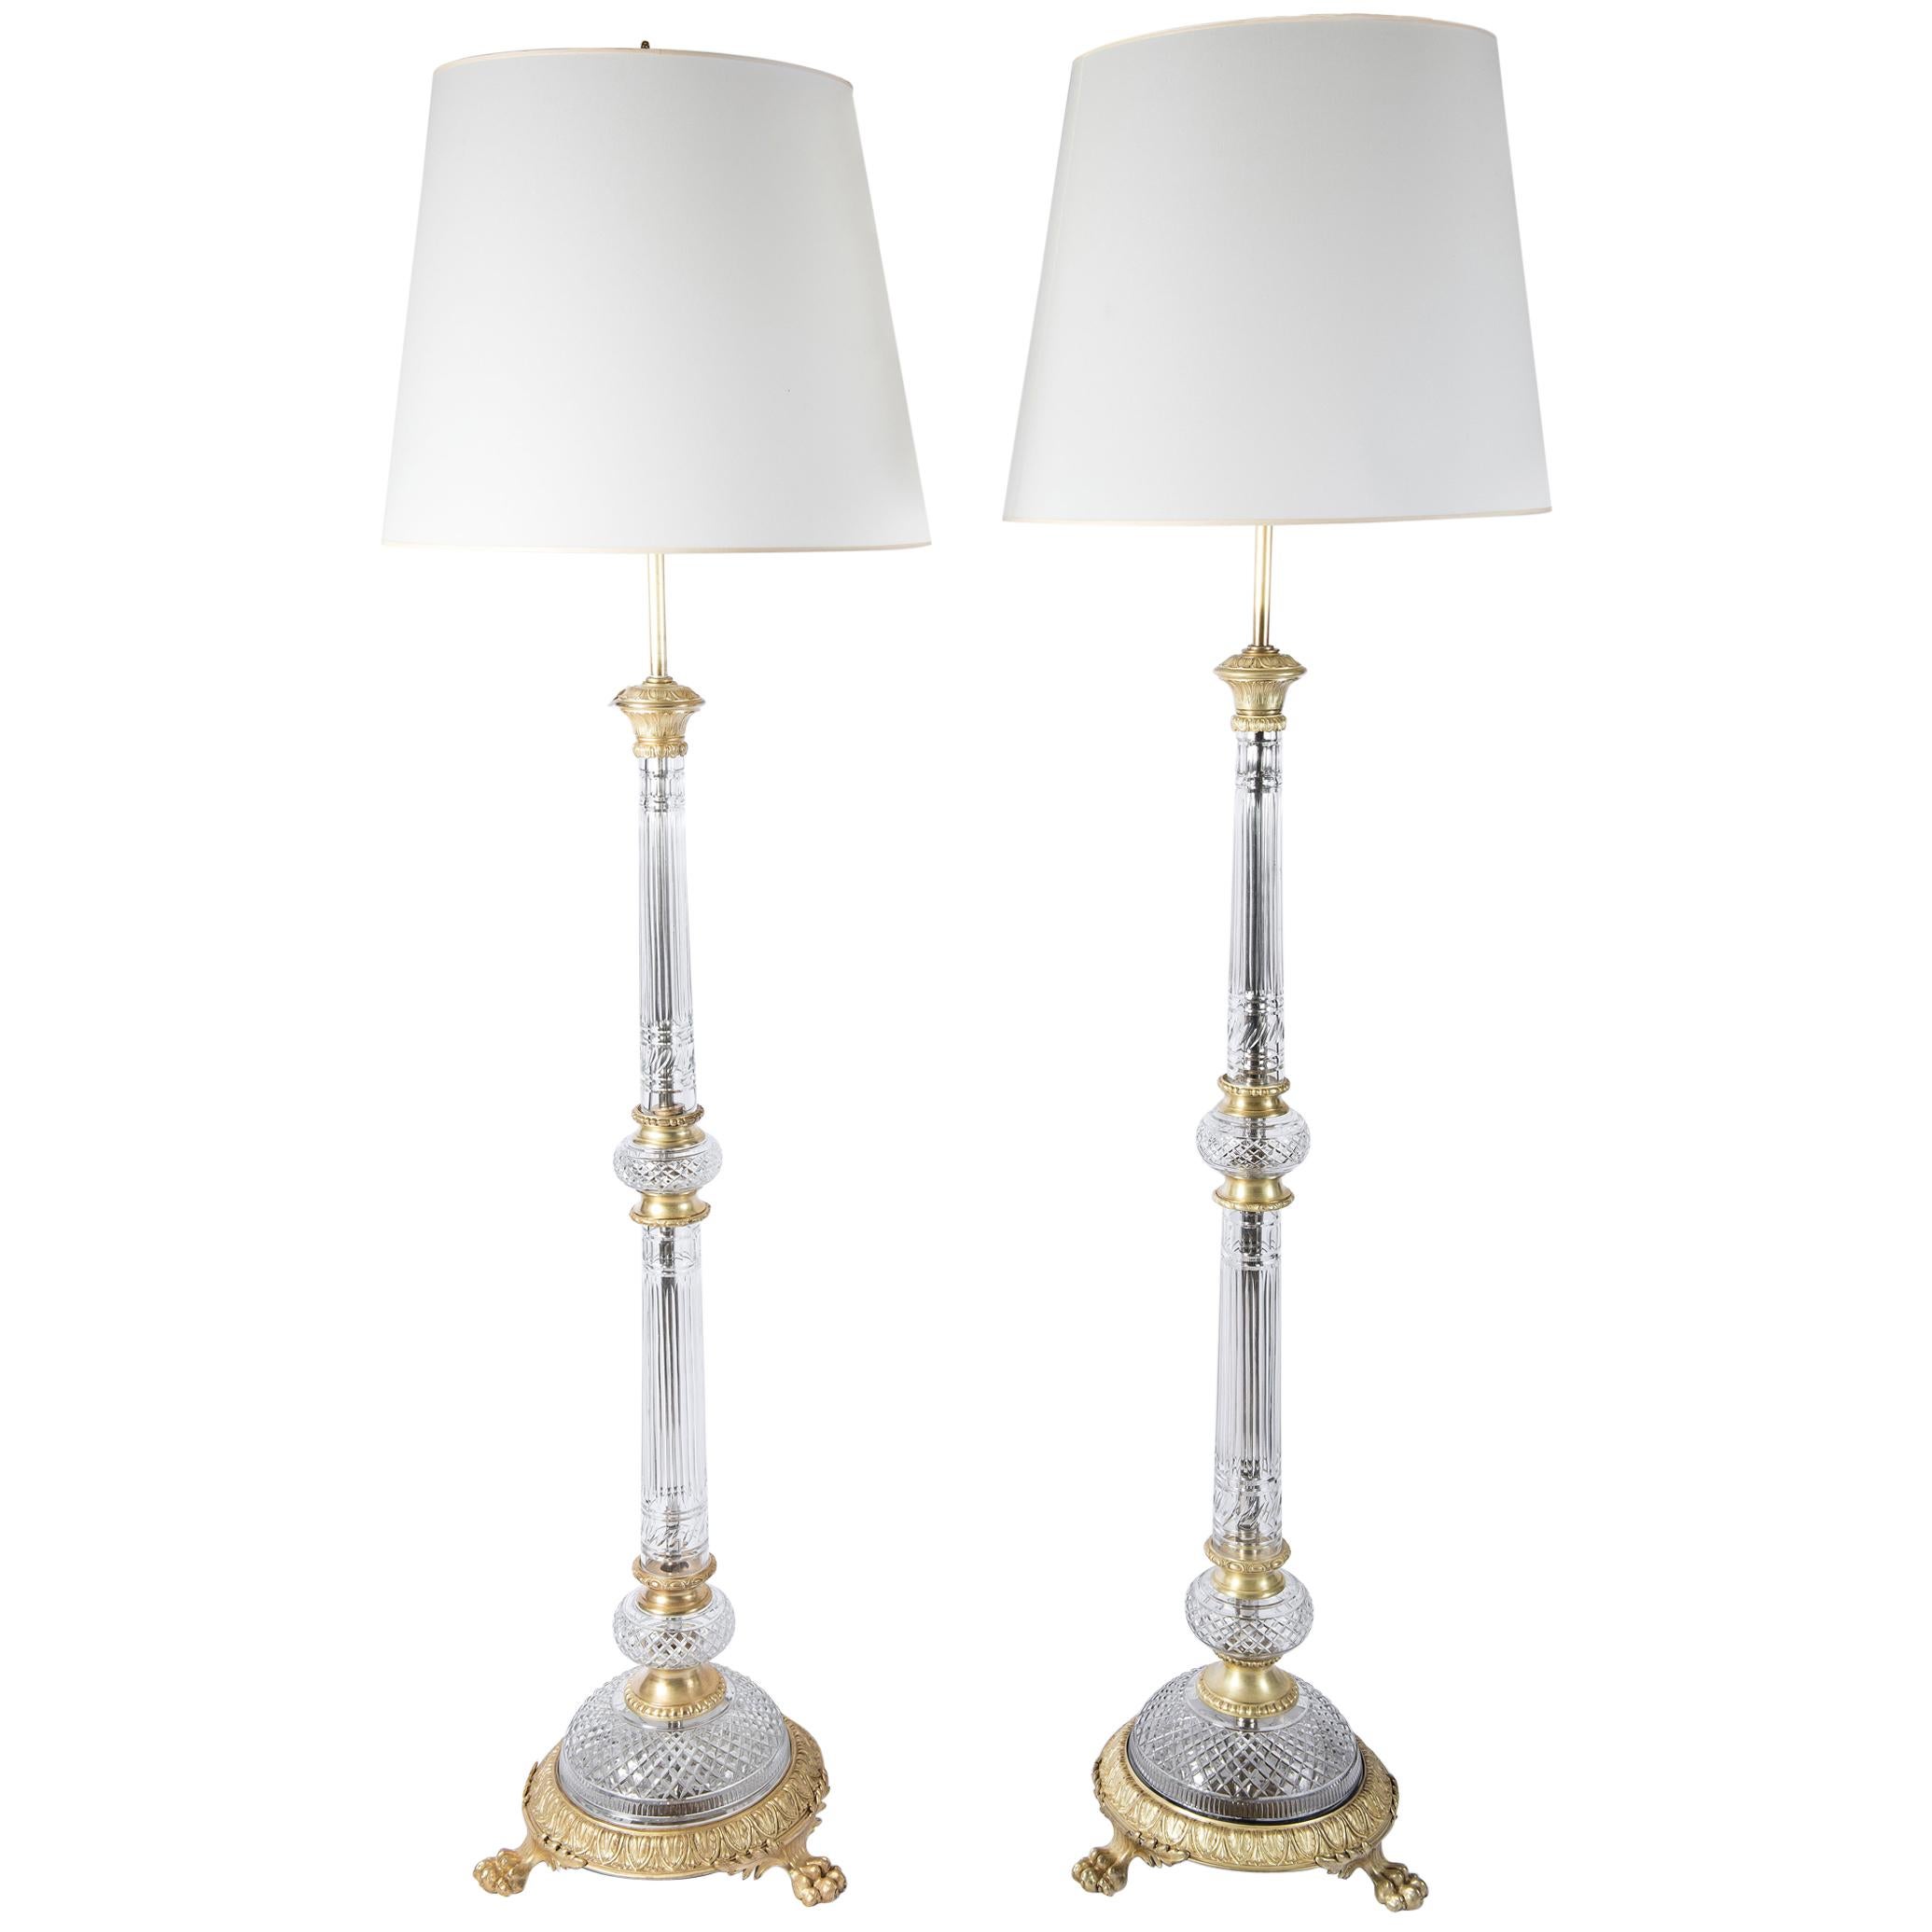 Pair of Cut Glass and Bronze Floor Lamps, F. & C. Osler Style, England